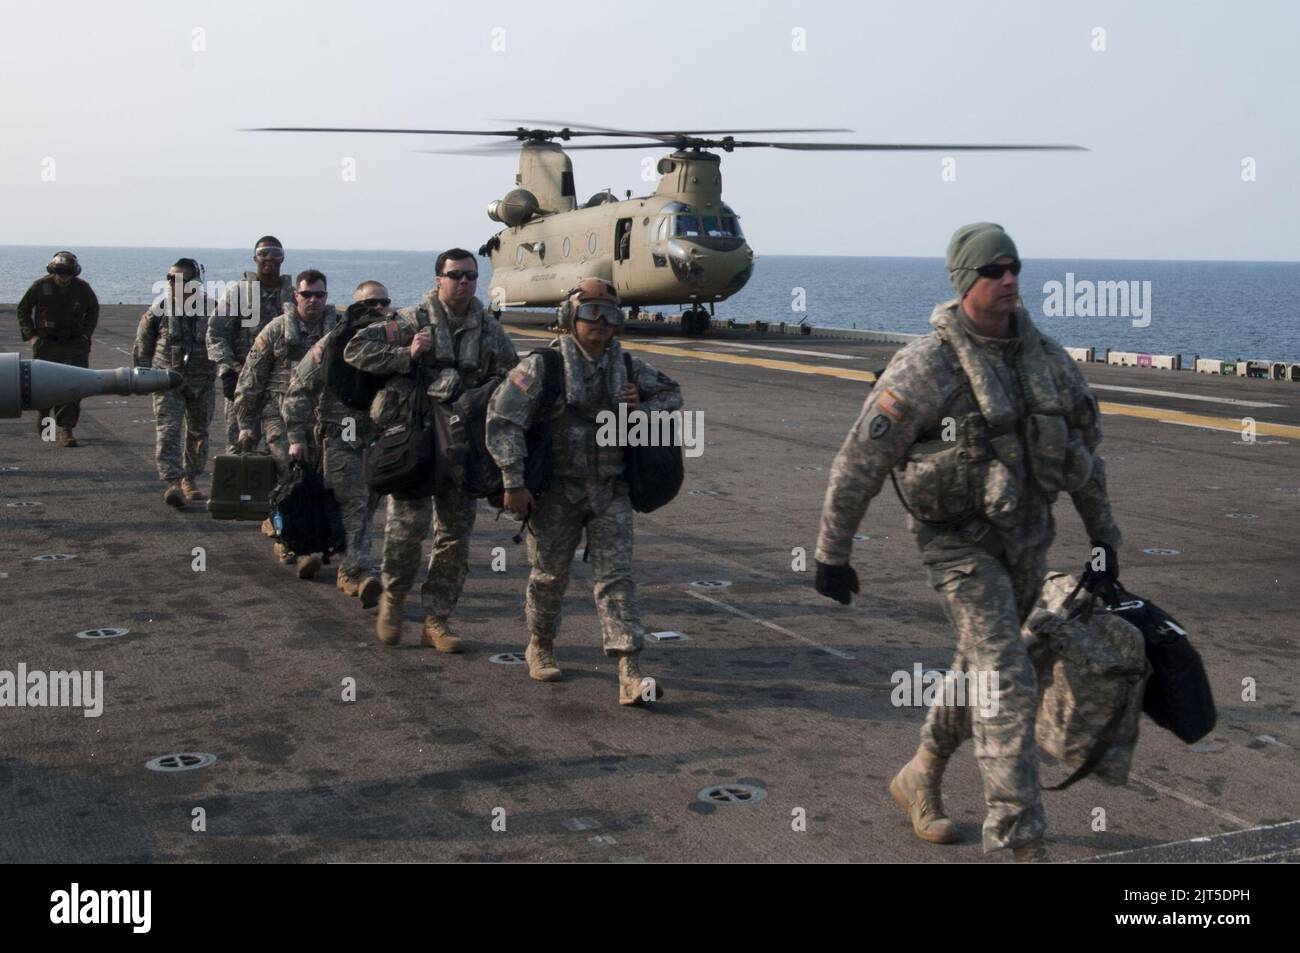 U.S. Soldiers assigned to the 3rd General Support Aviation Battalion, 2nd Combat Aviation Brigade, 2nd Infantry Division disembark from an Army CH-47F Chinook helicopter on the flight deck of the amphibious 140411 Stock Photo